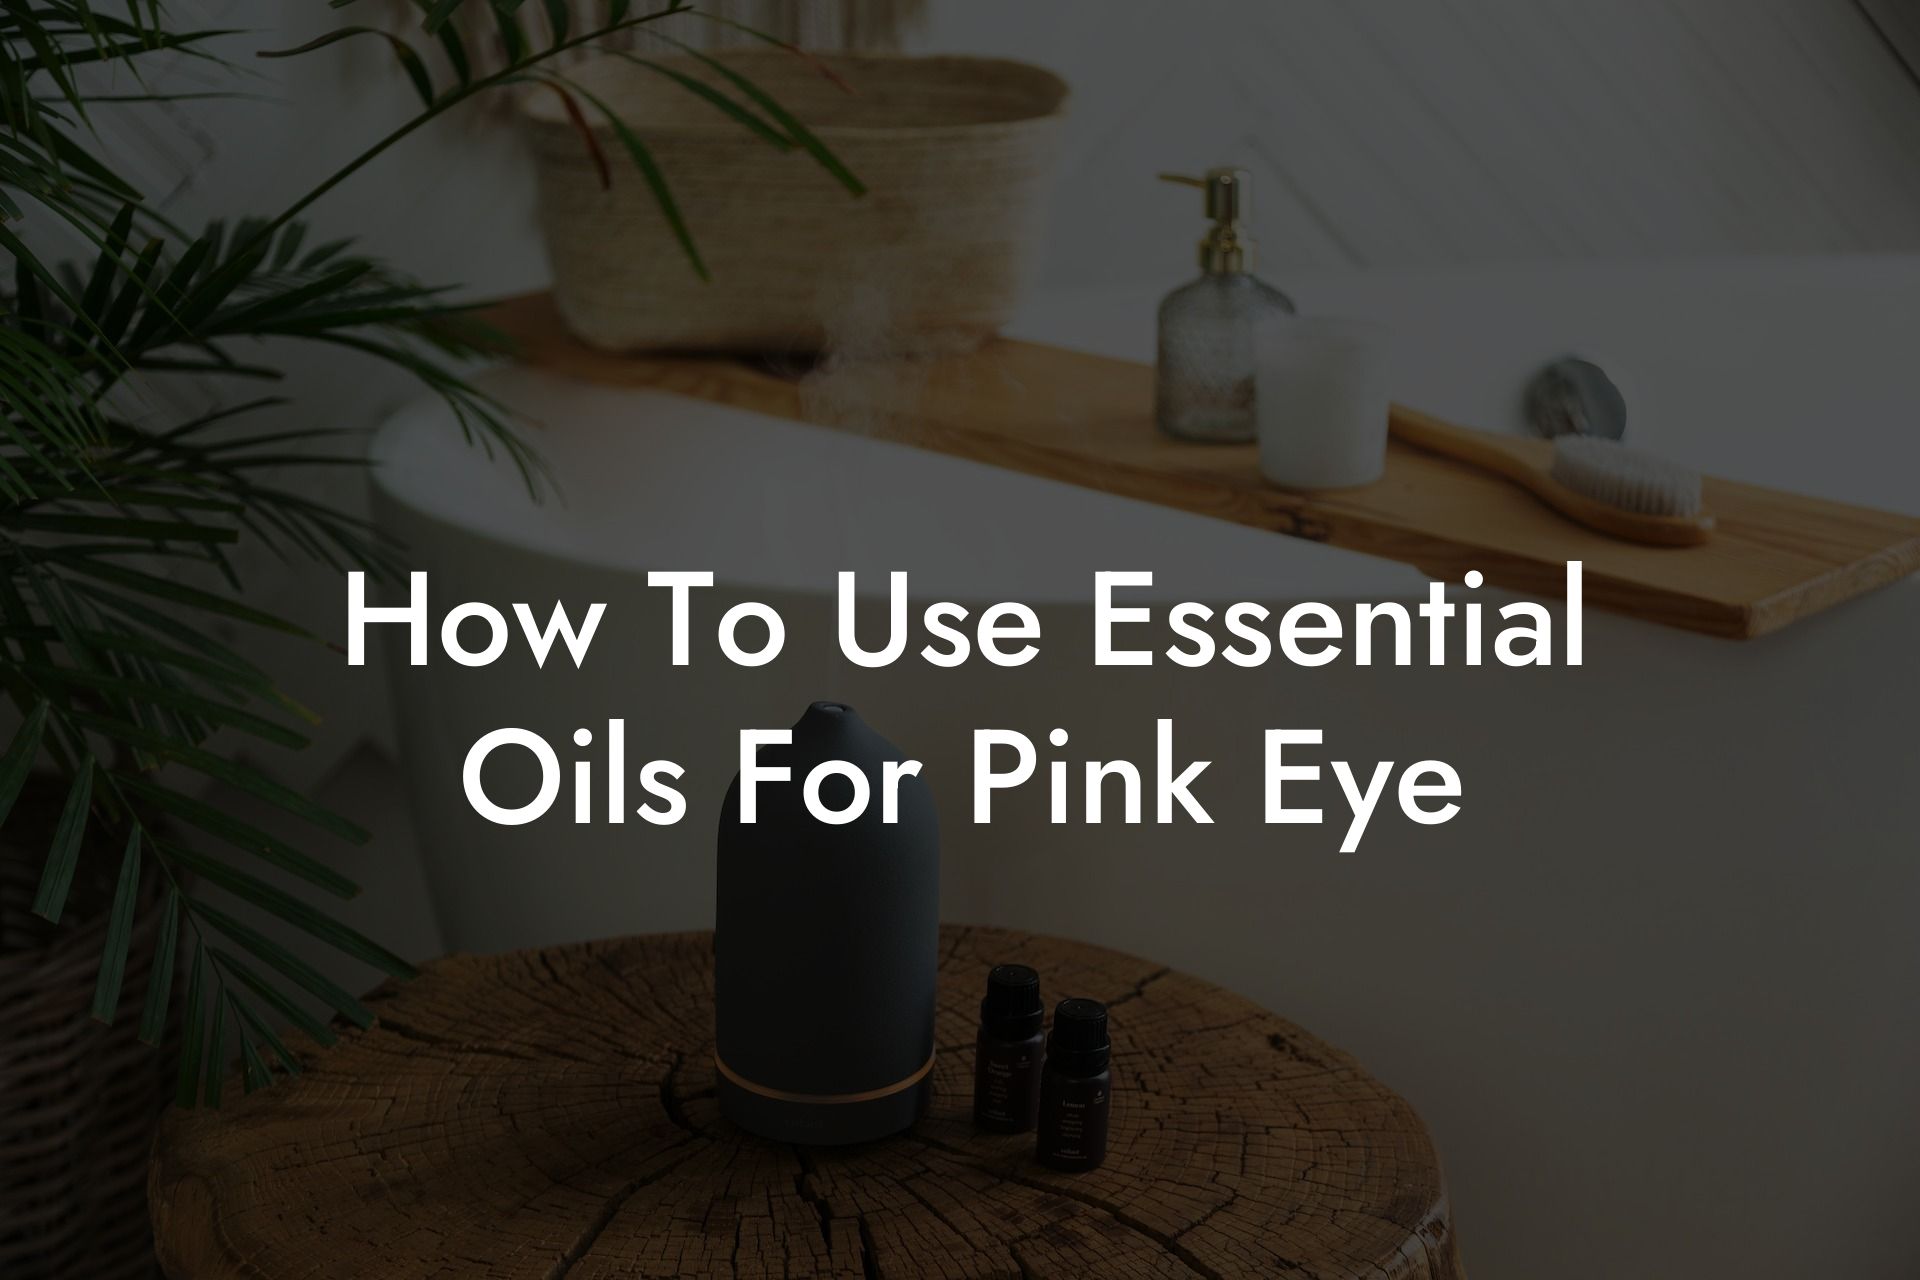 How To Use Essential Oils For Pink Eye